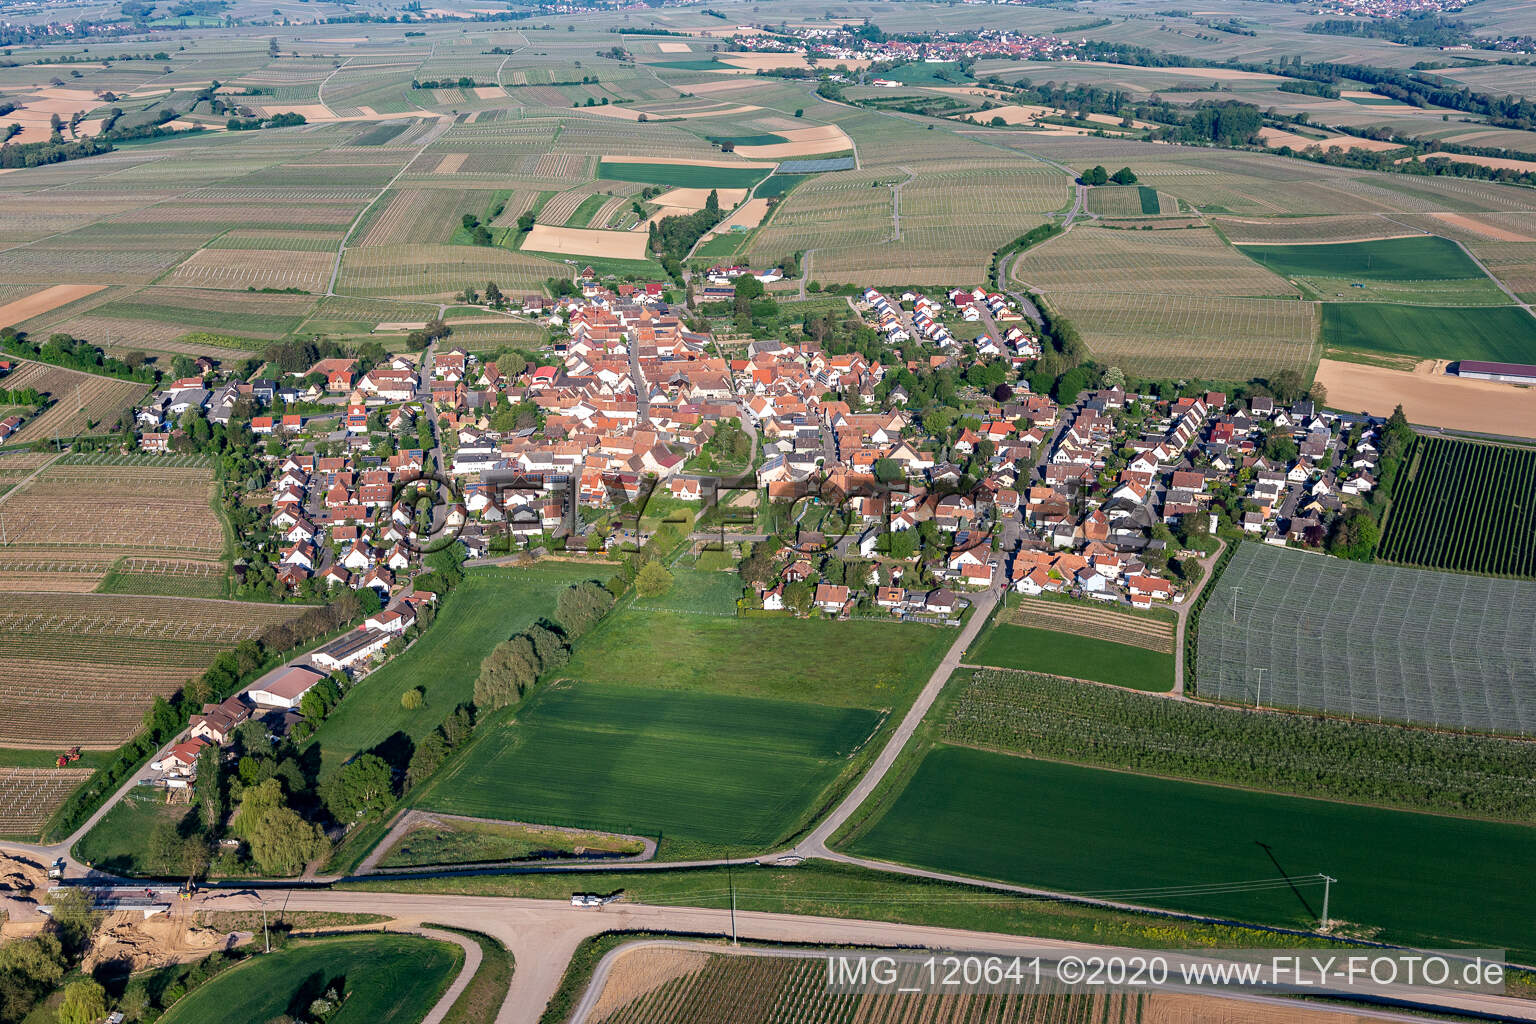 Aerial photograpy of Village - view on the edge of agricultural fields and farmland in Impflingen in the state Rhineland-Palatinate, Germany